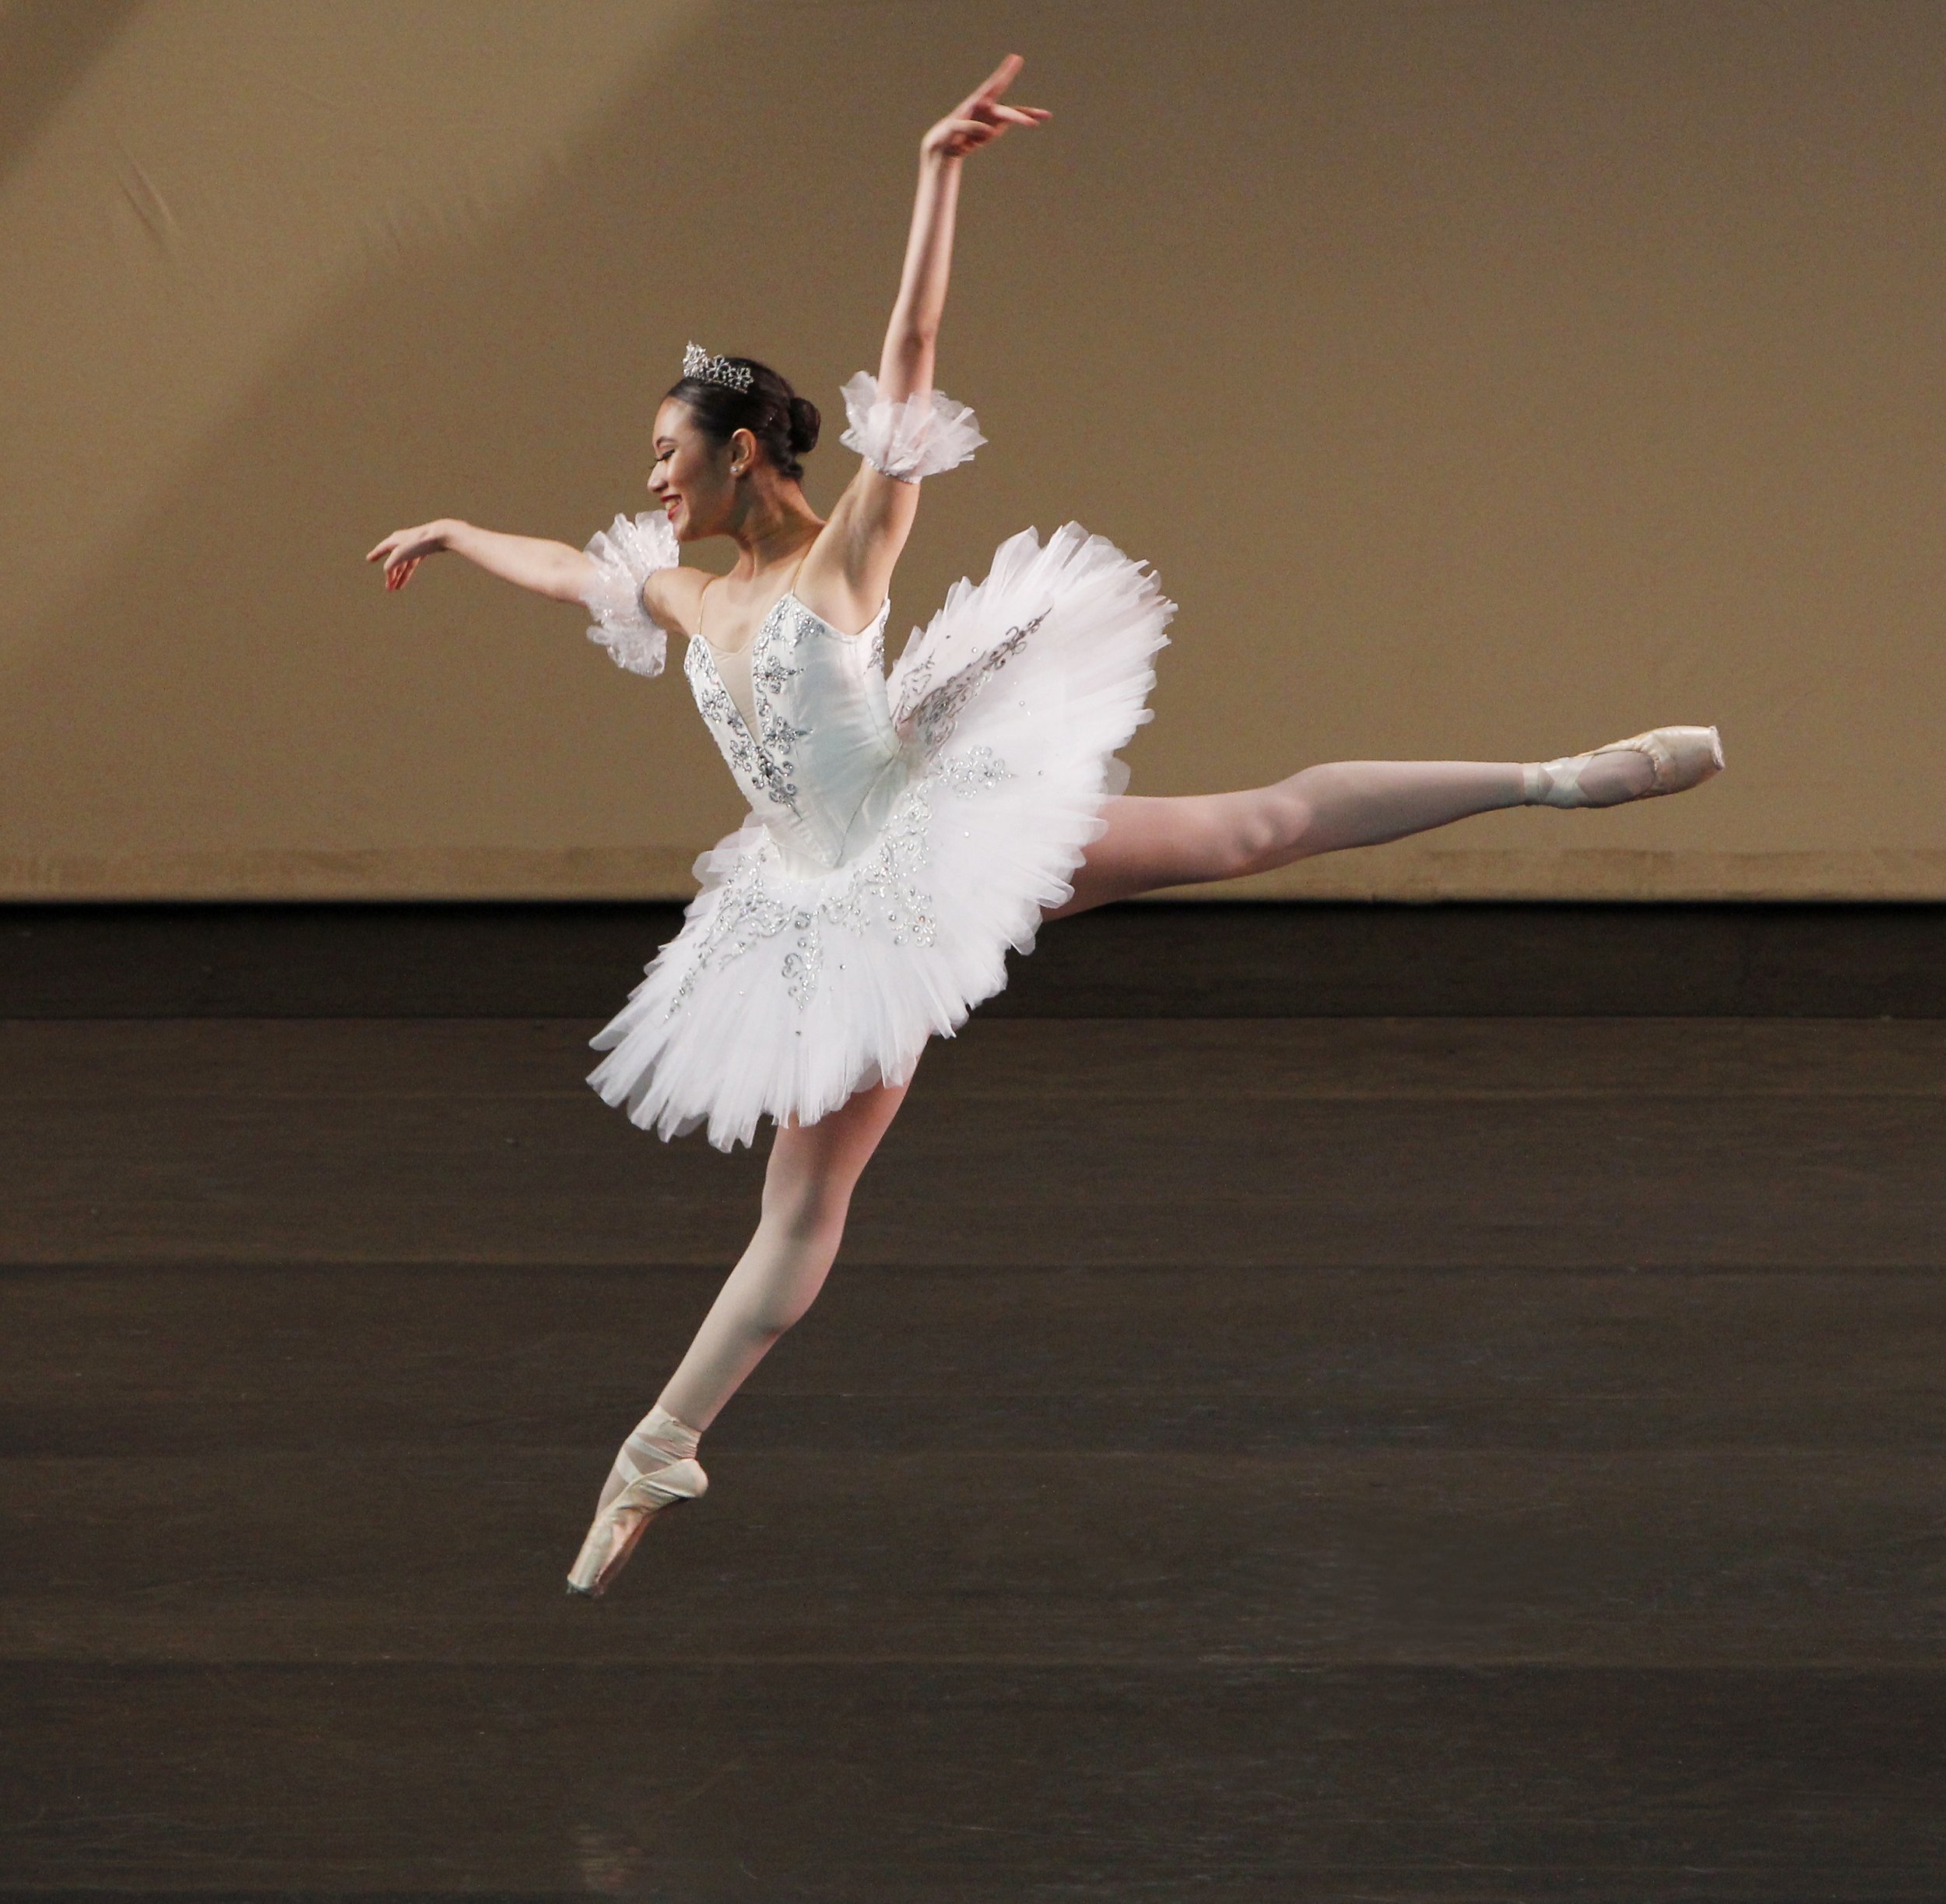    Pristine and pure are the two words that seem synonymous with this white tutu worn by Abigail Oliveiro. She danced a variation from Marius Petipa’s  Paquita  for Ballet Manila’s  BM 2.0,  the company’s 20th anniversary concert in 2015. Photo by Oc